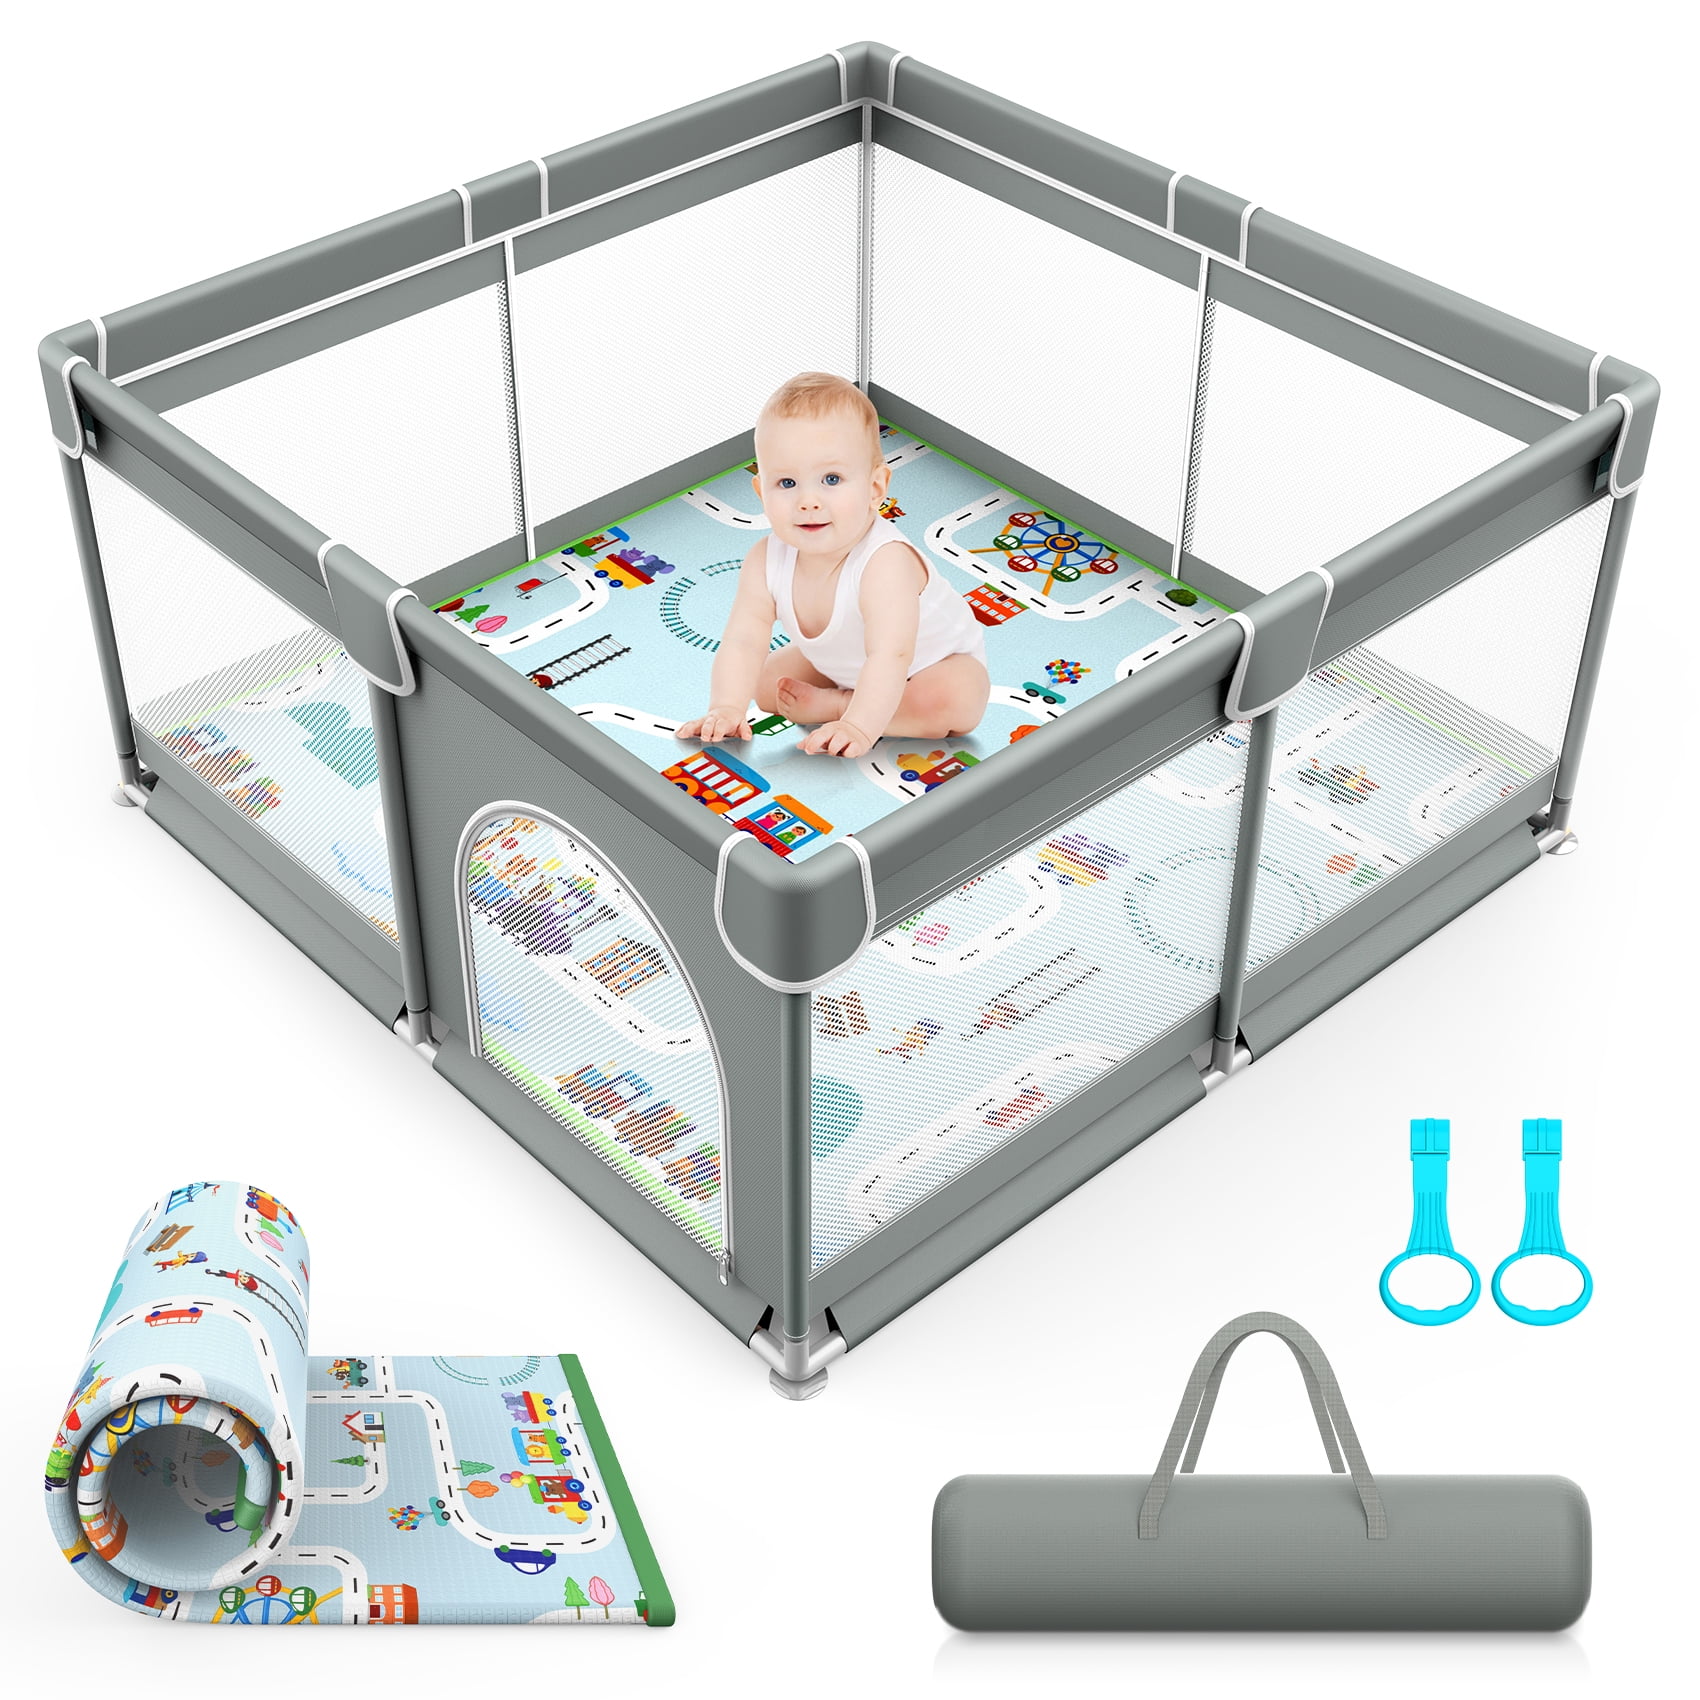 Bed With Extra Protection, Nursery Bed, Toddler Pen, Play Bed